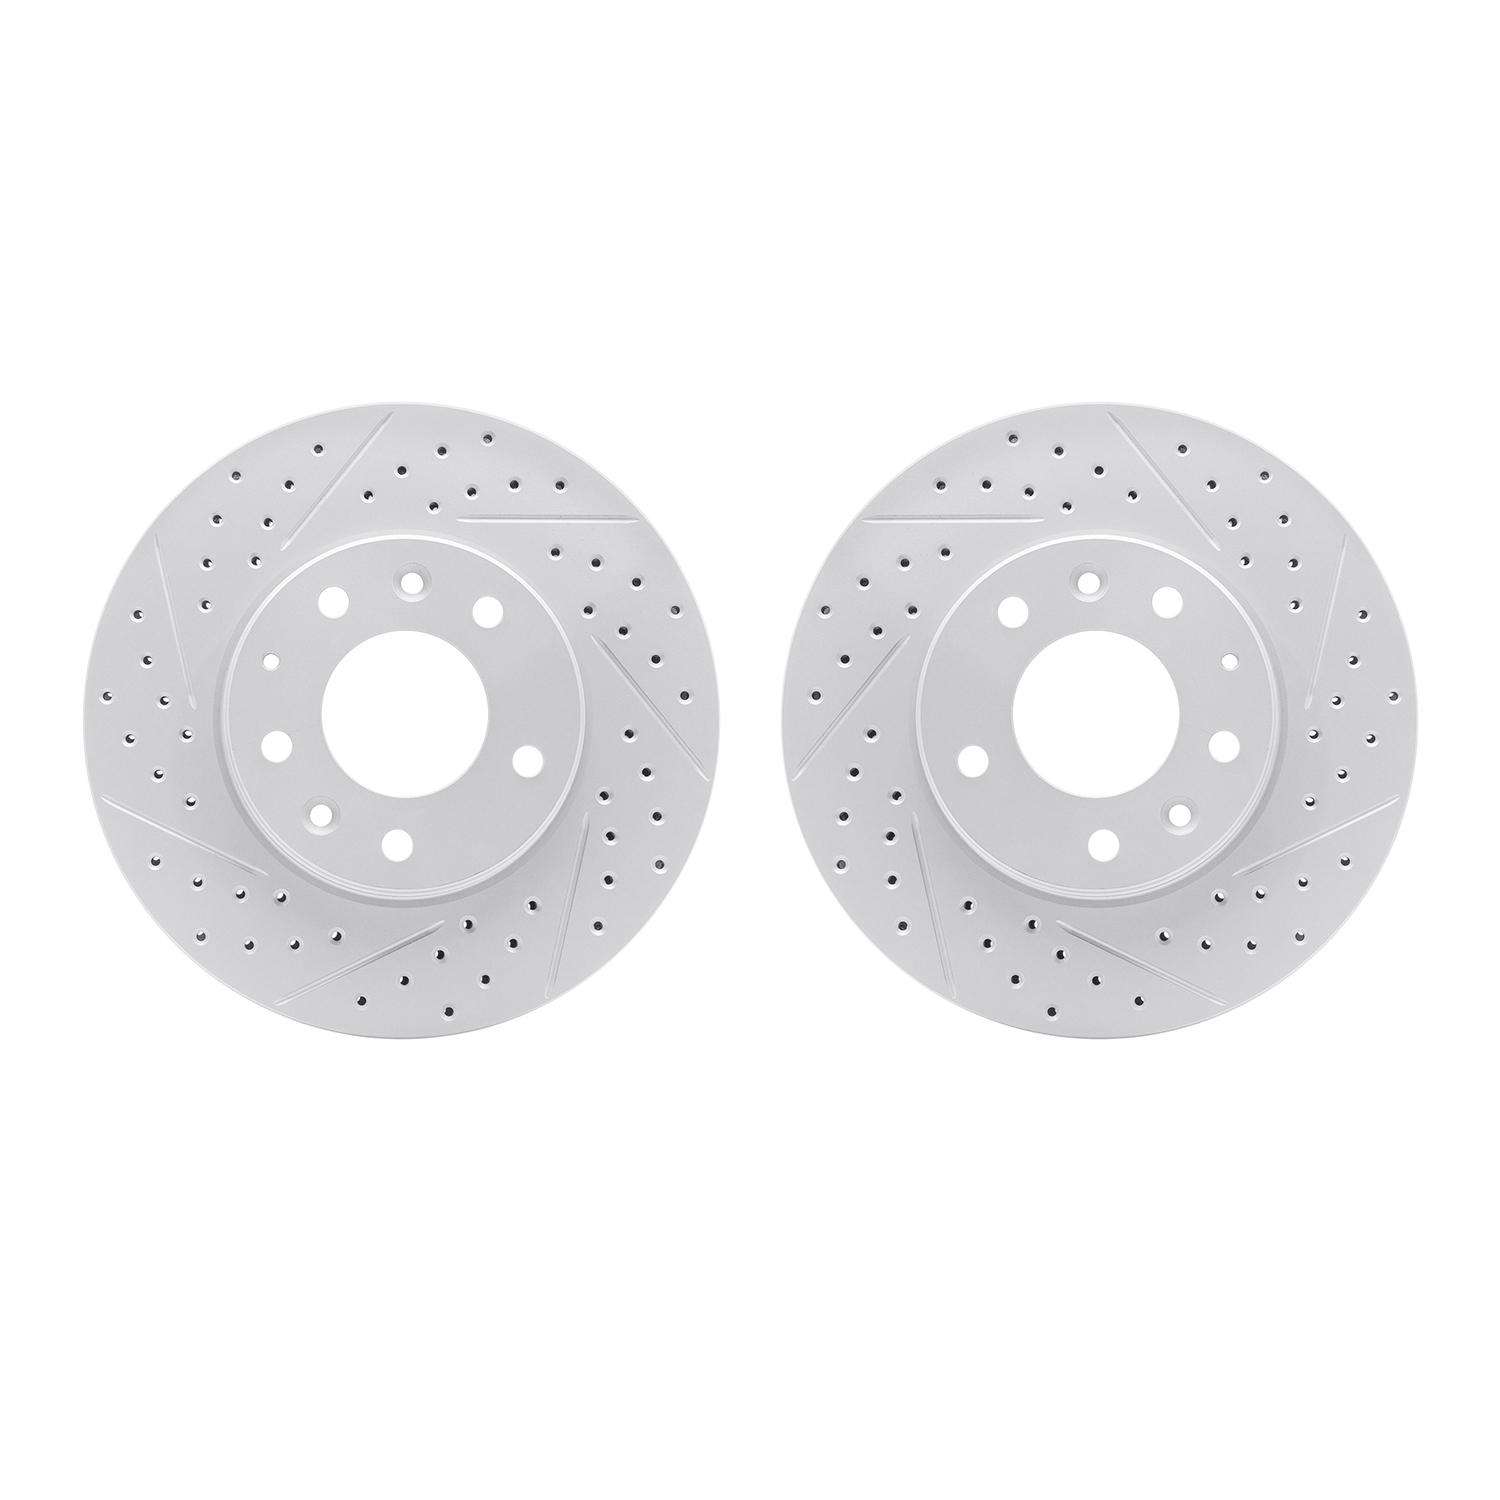 2002-80011 Geoperformance Drilled/Slotted Brake Rotors, 2003-2005 Ford/Lincoln/Mercury/Mazda, Position: Front